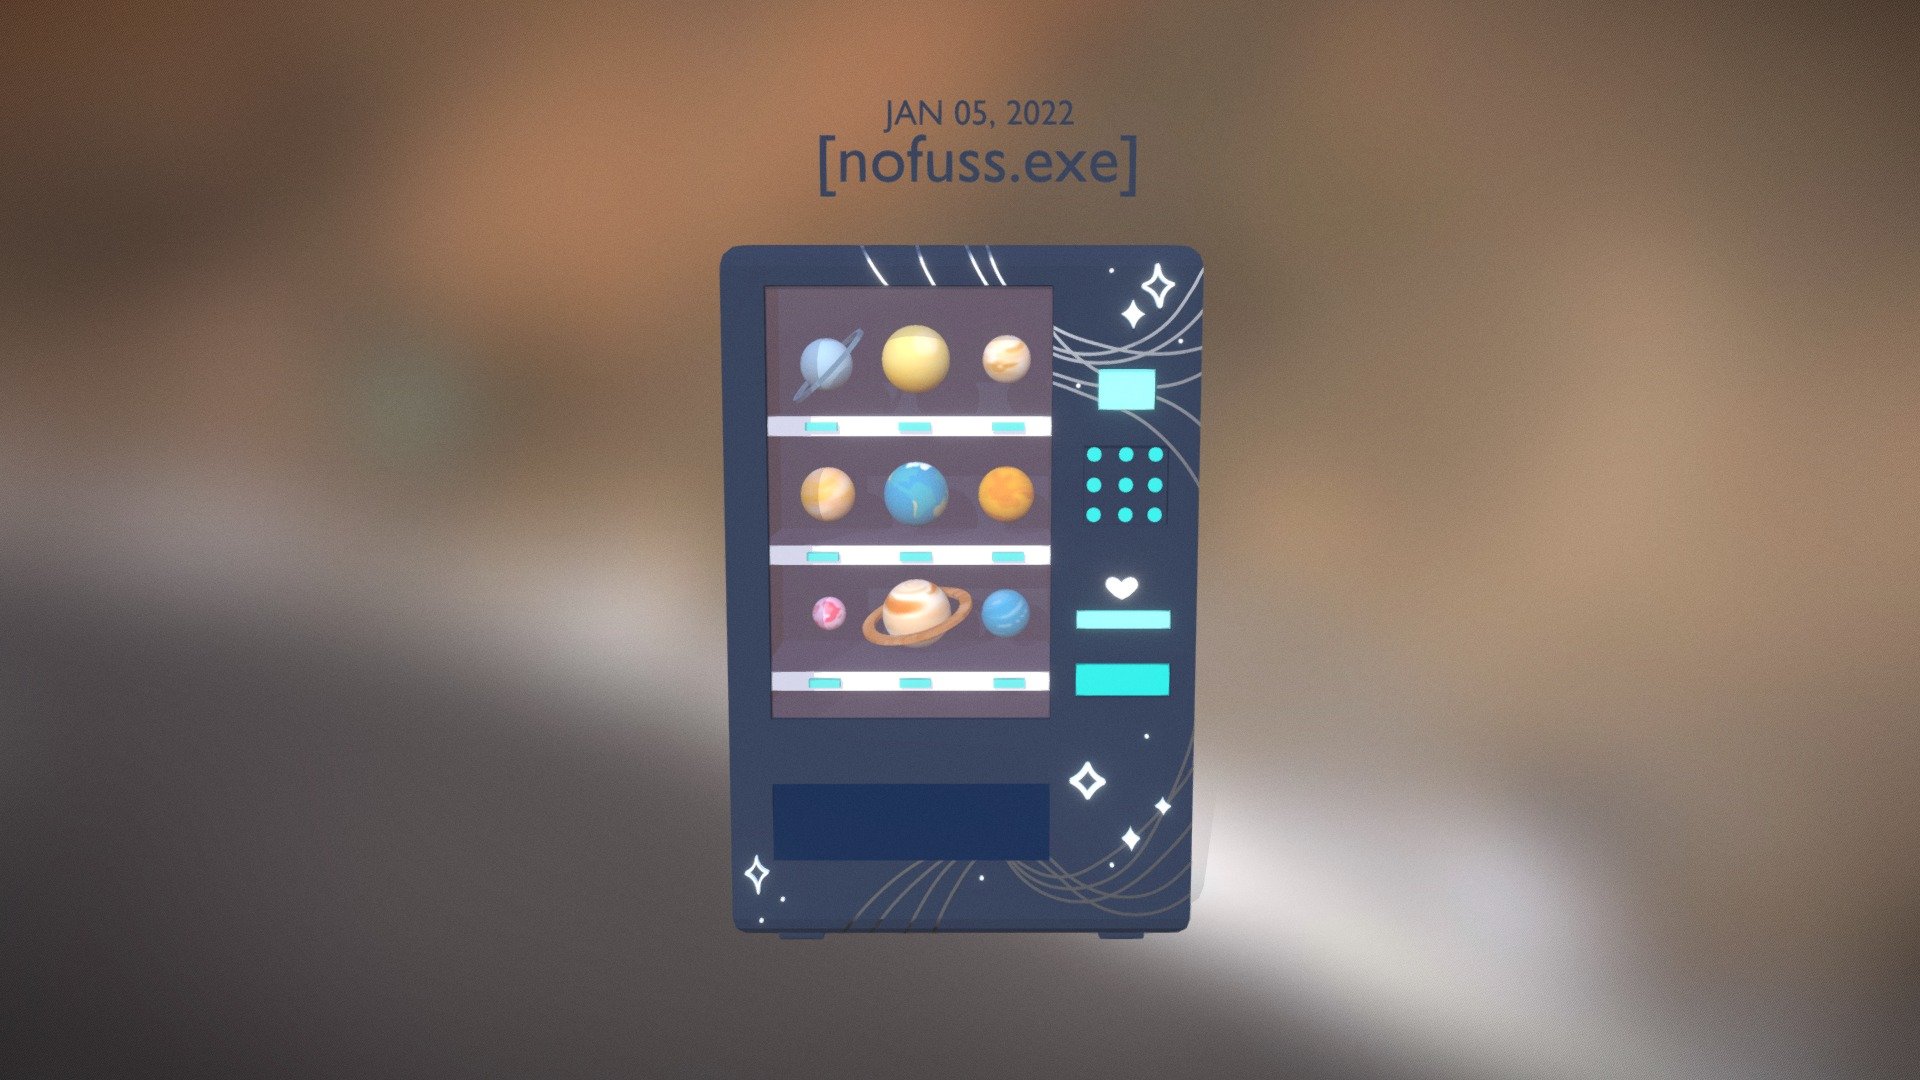 Space Vending Machine - Animated - 3D model by nofuss.exe [aa36b48